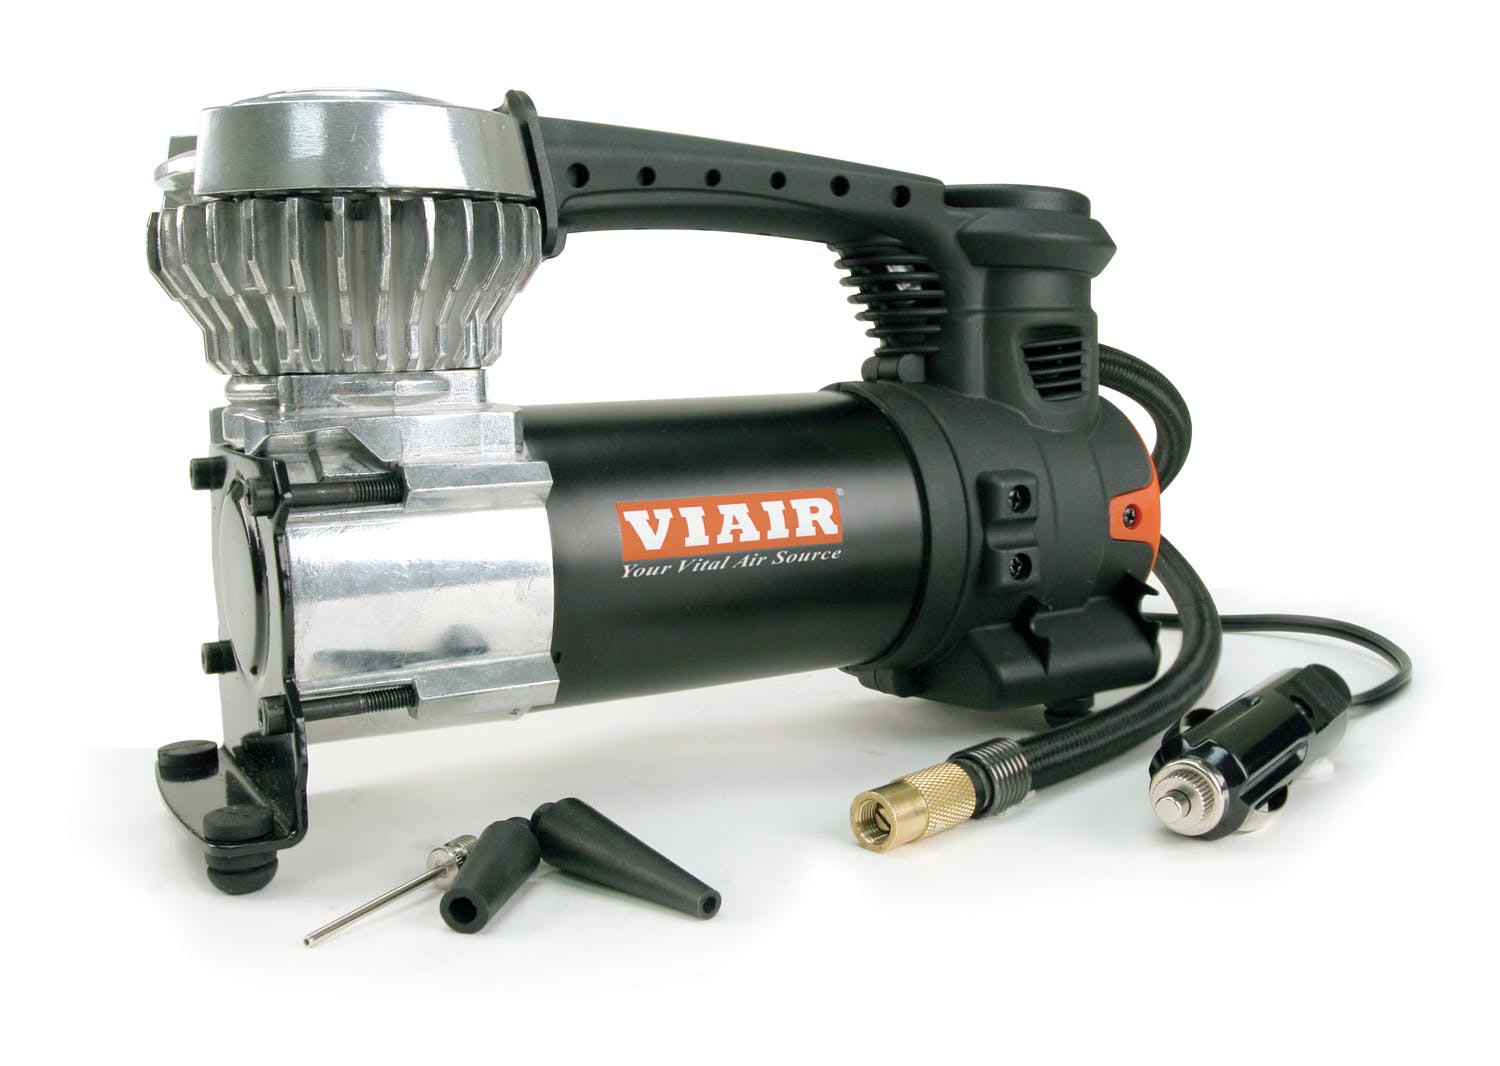 VIAIR 85P Portable Compressor Kit Sport Compact Series 60 PSI Rated 00085